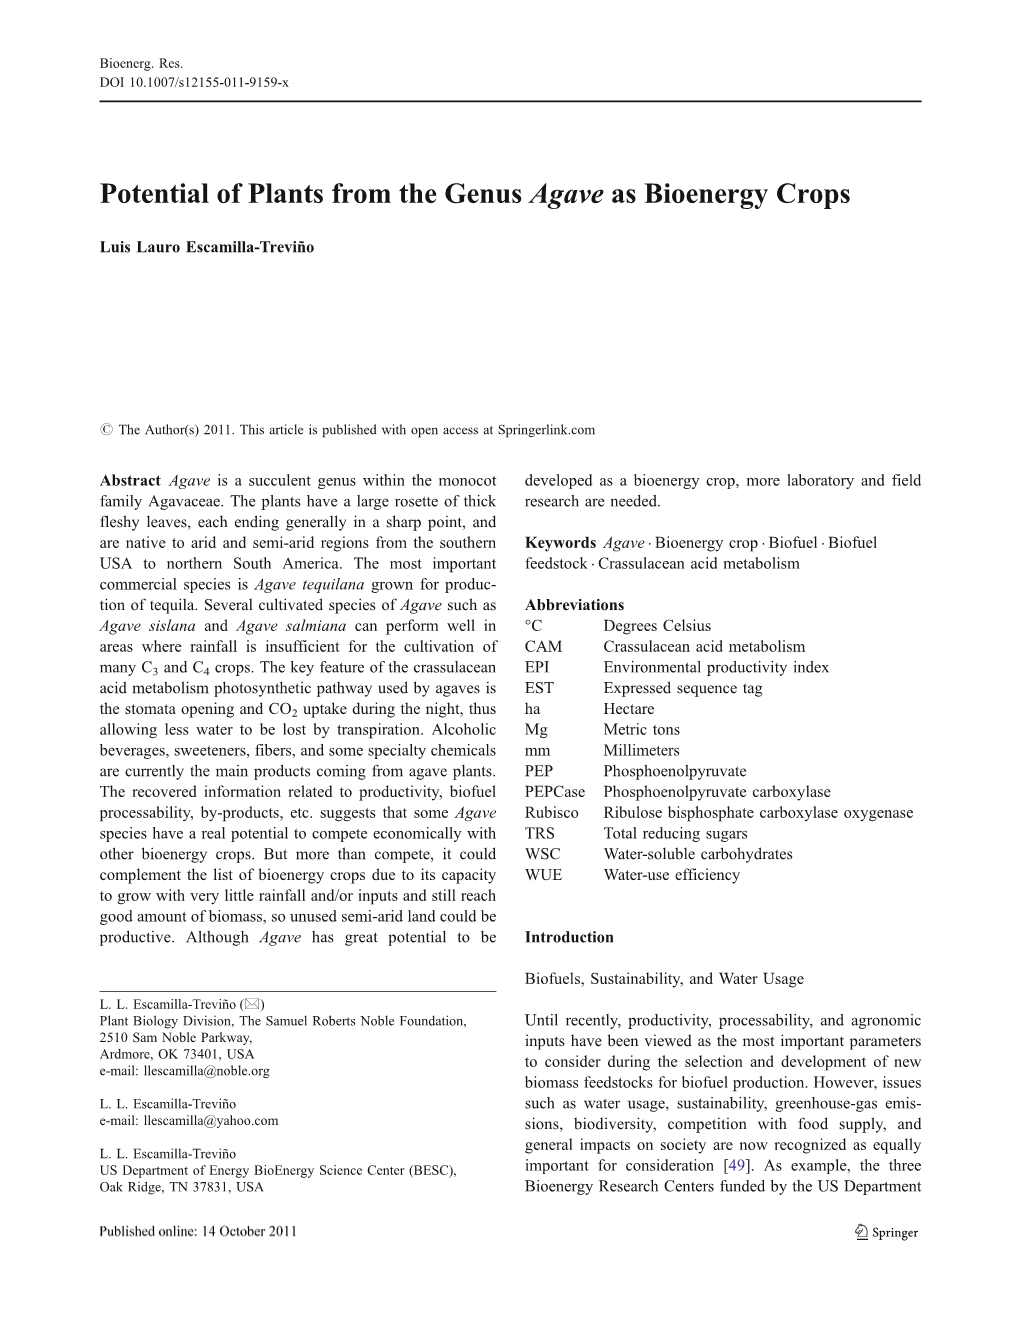 Potential of Plants from the Genus Agave As Bioenergy Crops